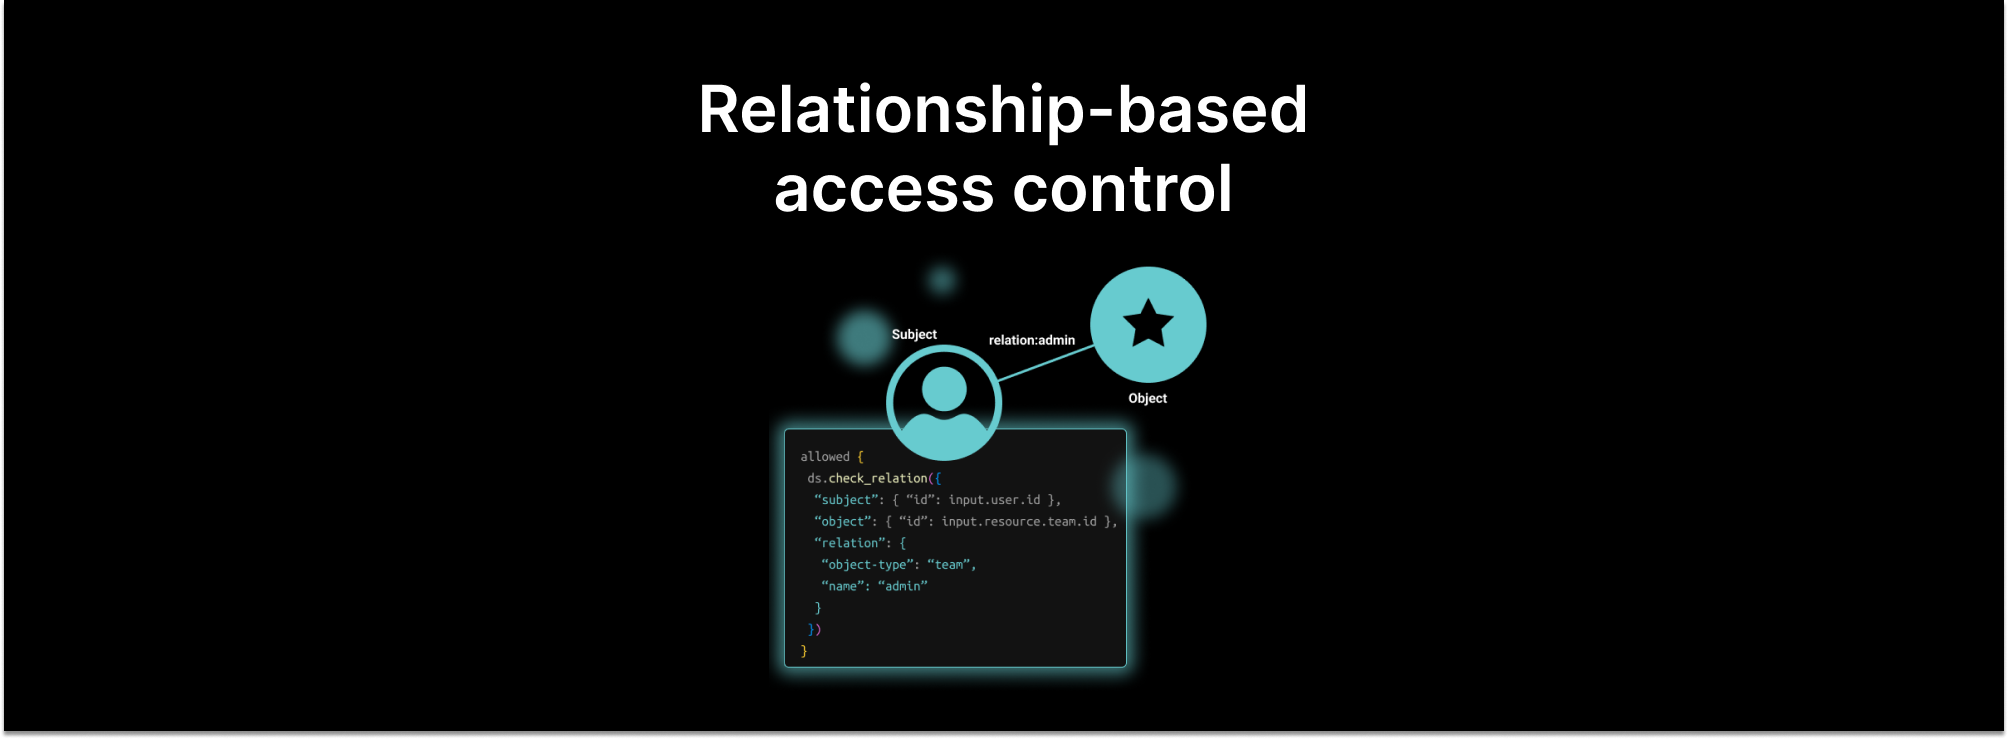 Relationship-based access controls is the future of IAM